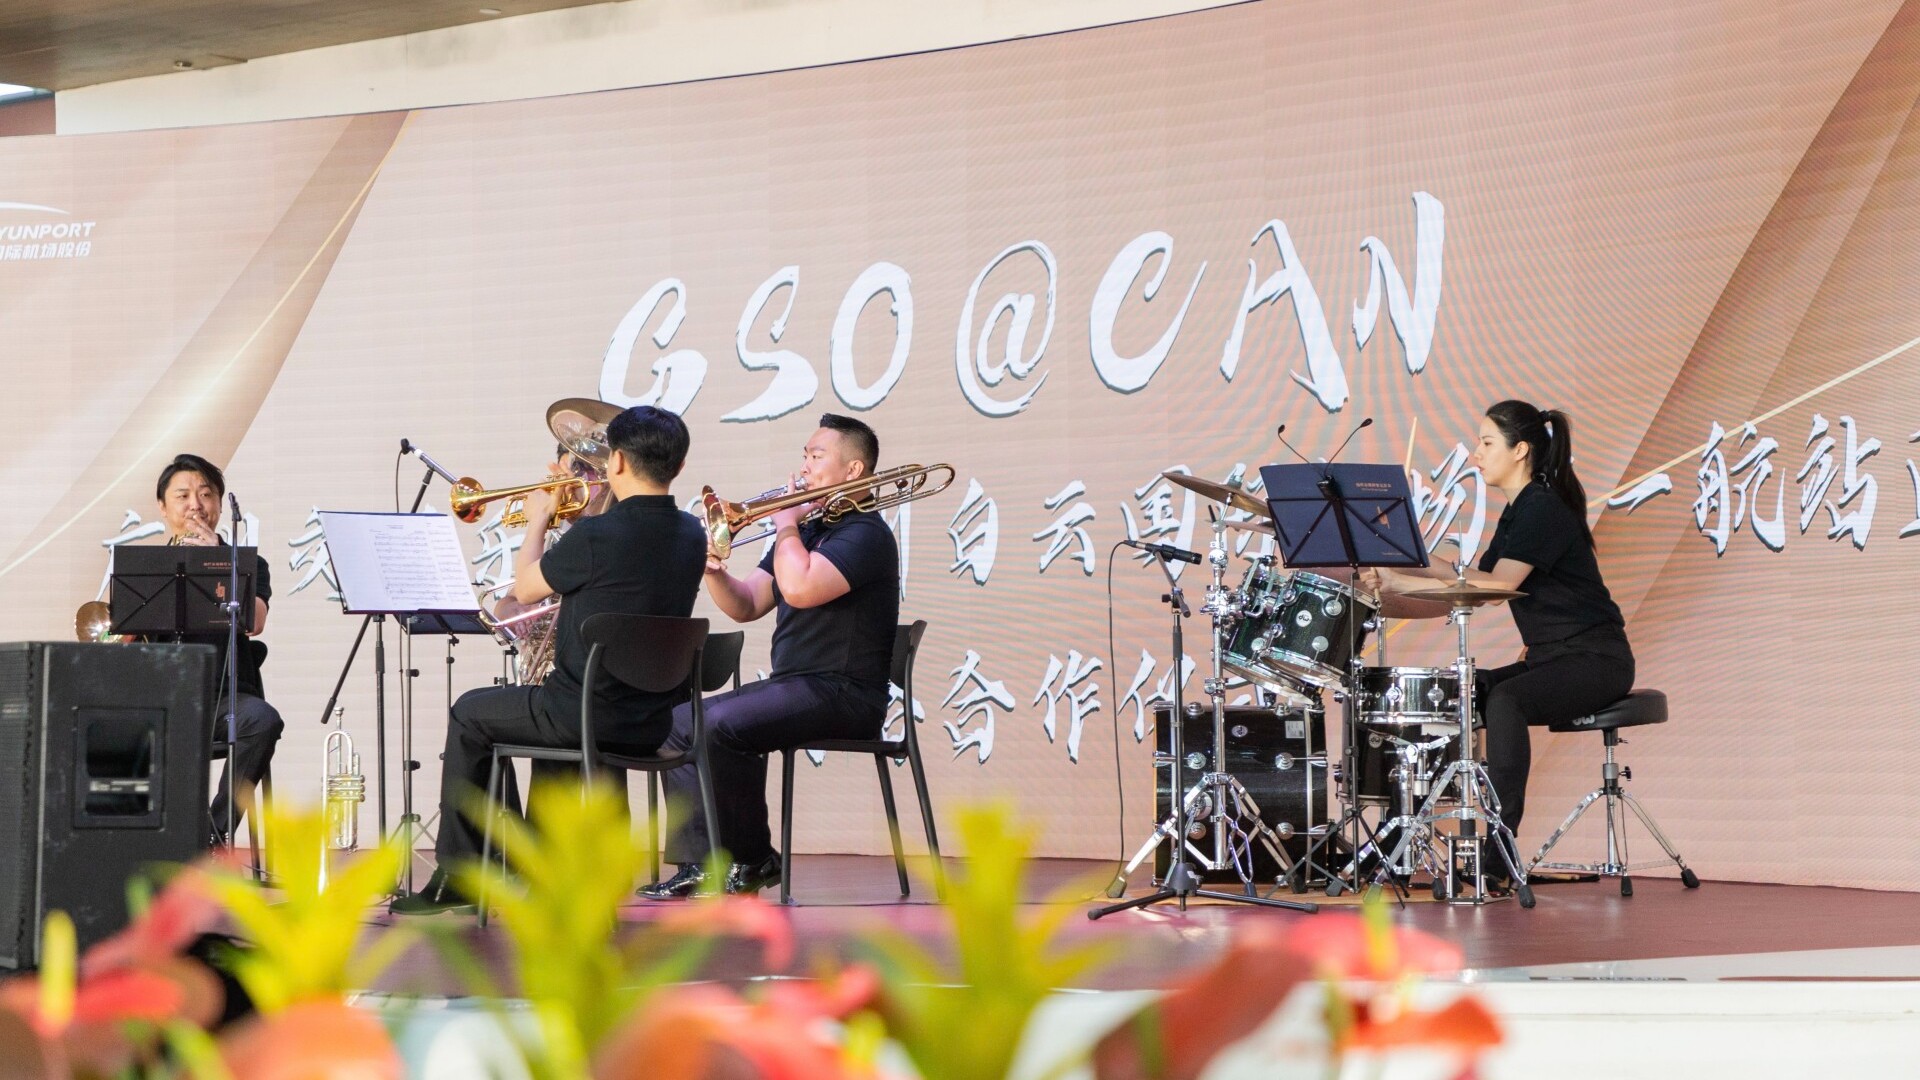 GSO joins hands with Baiyun Airport to enrich your journey with music